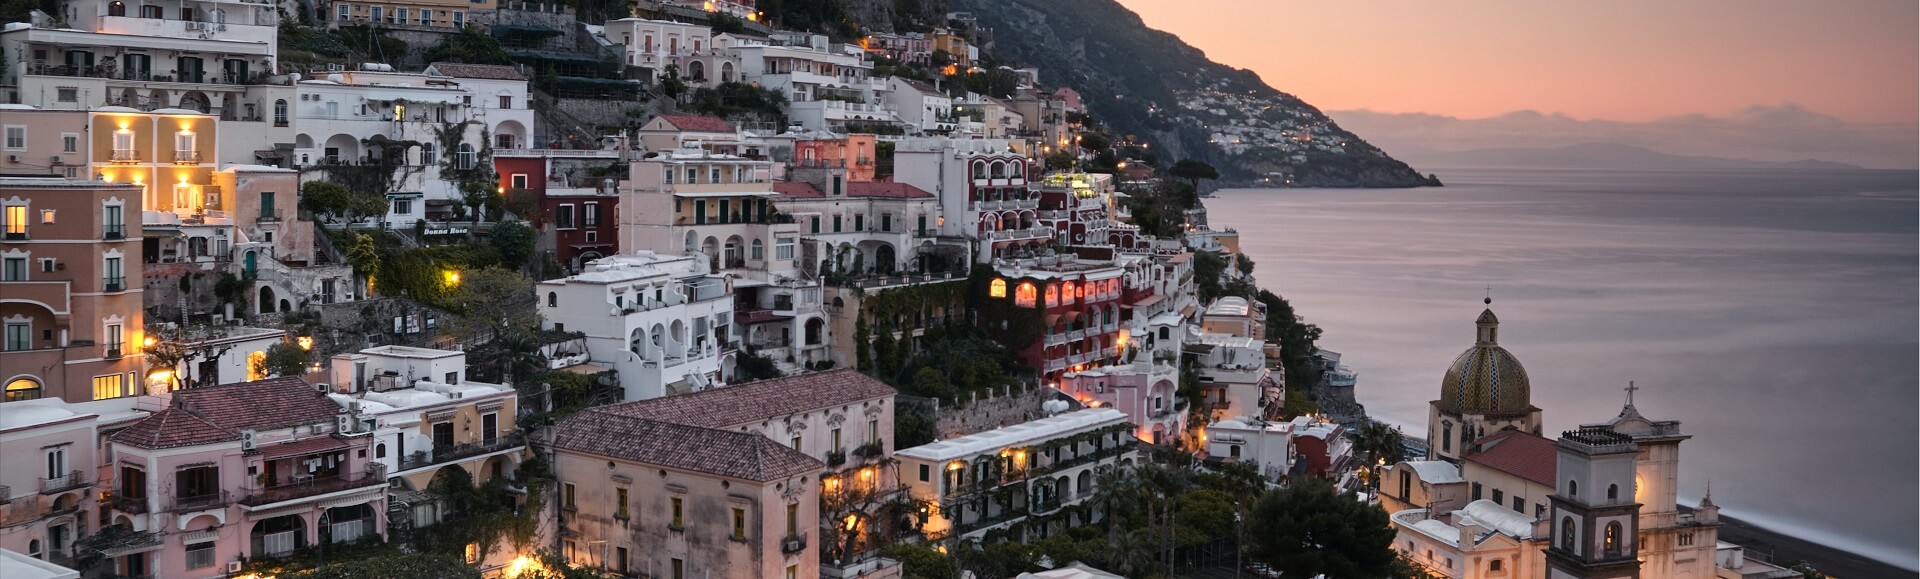 What can you do on the Amalfi Coast in one day?